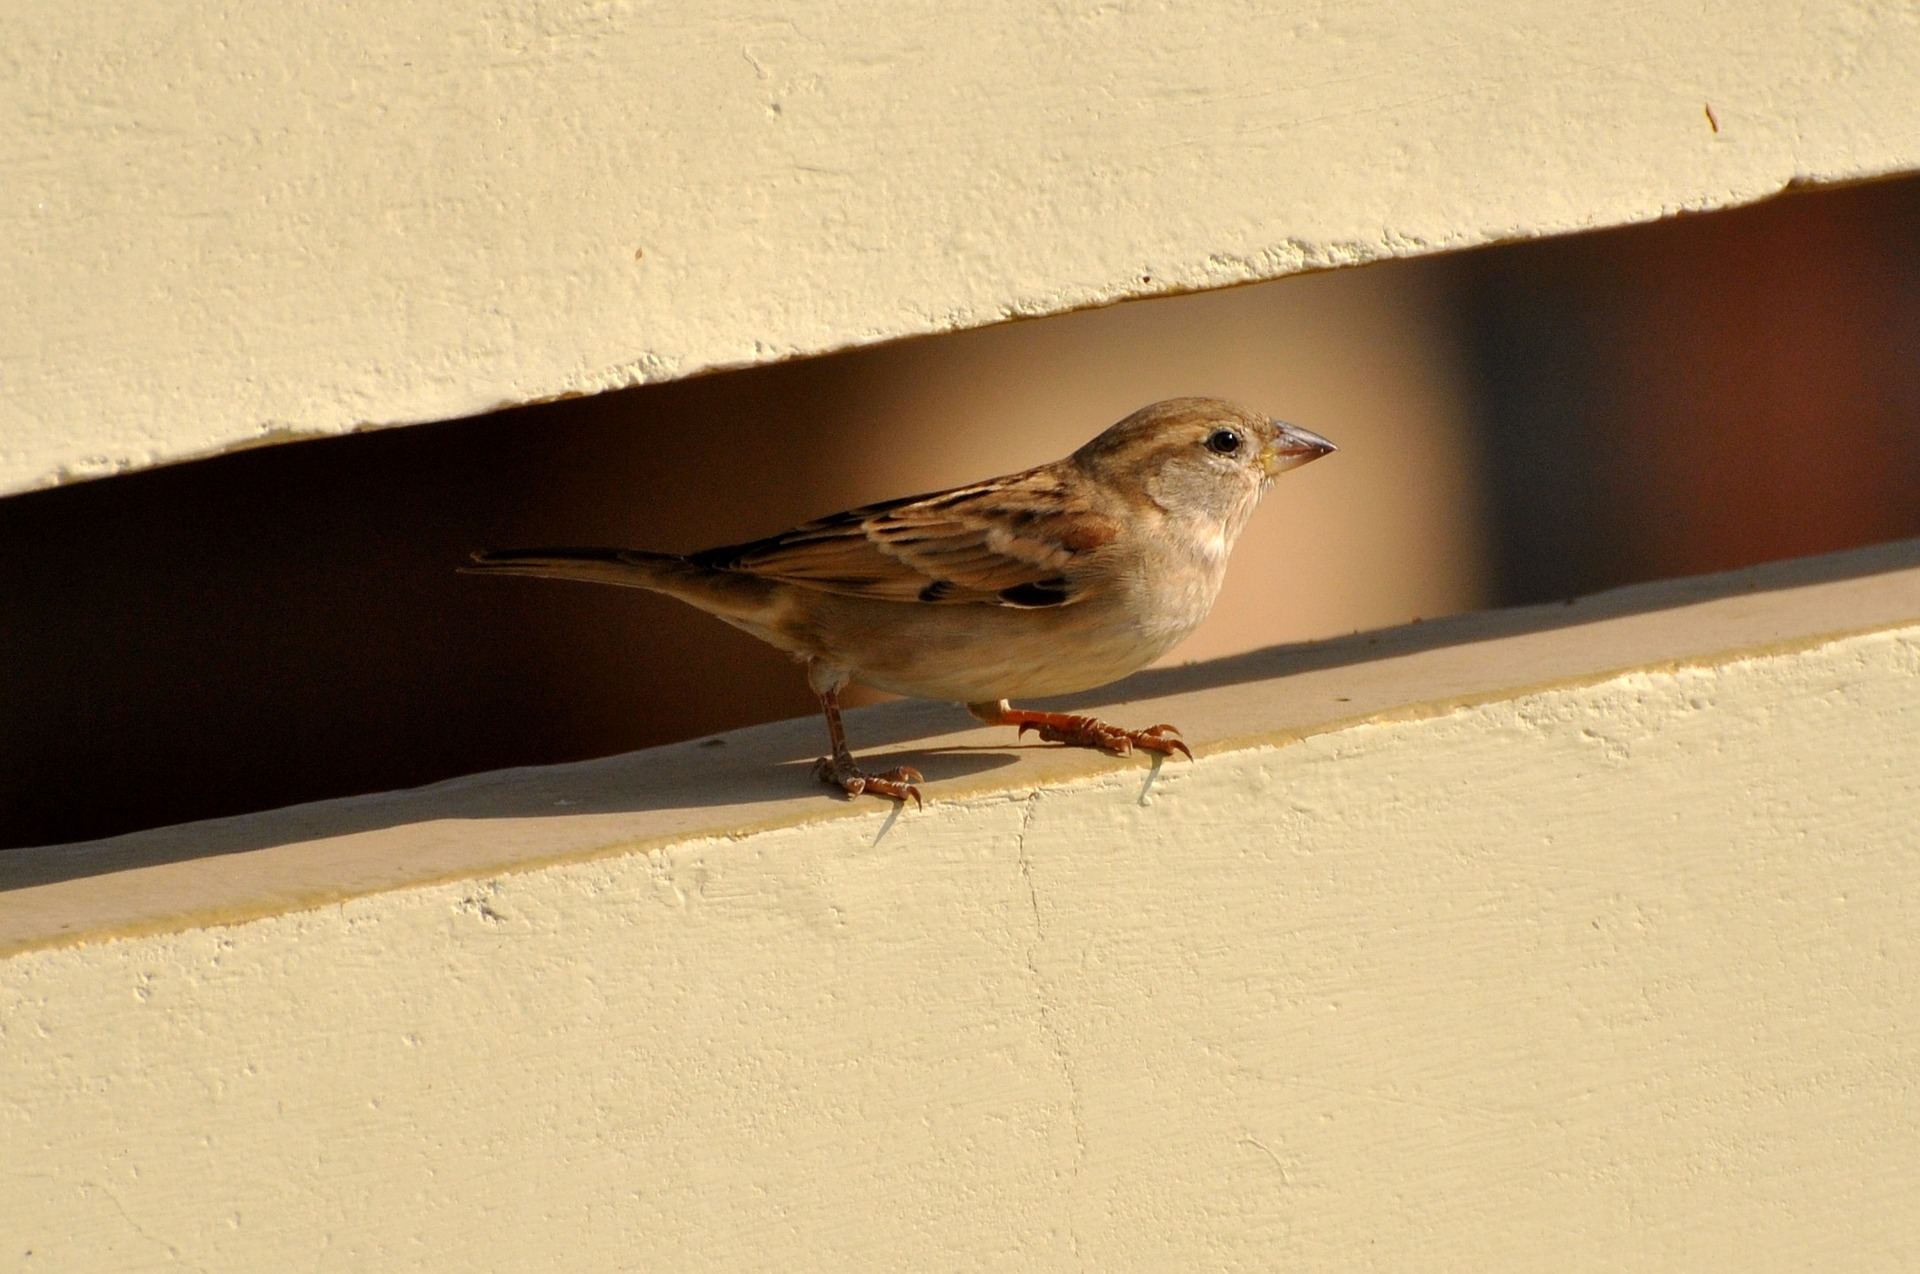 God sees the smallest sparrow and you from today's reading with Wes Schaeffer.